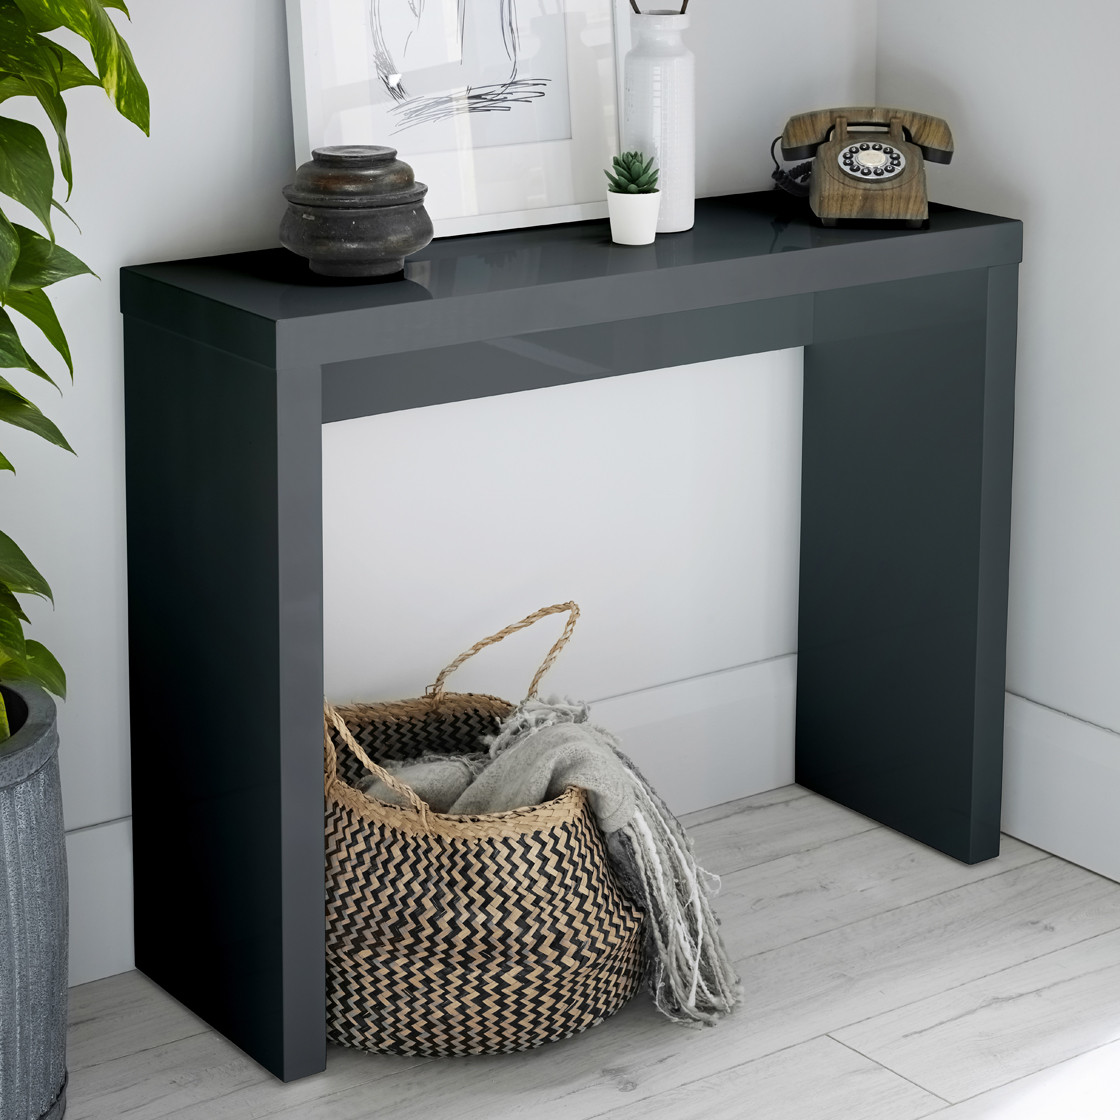 Puro Console Table Charcoal